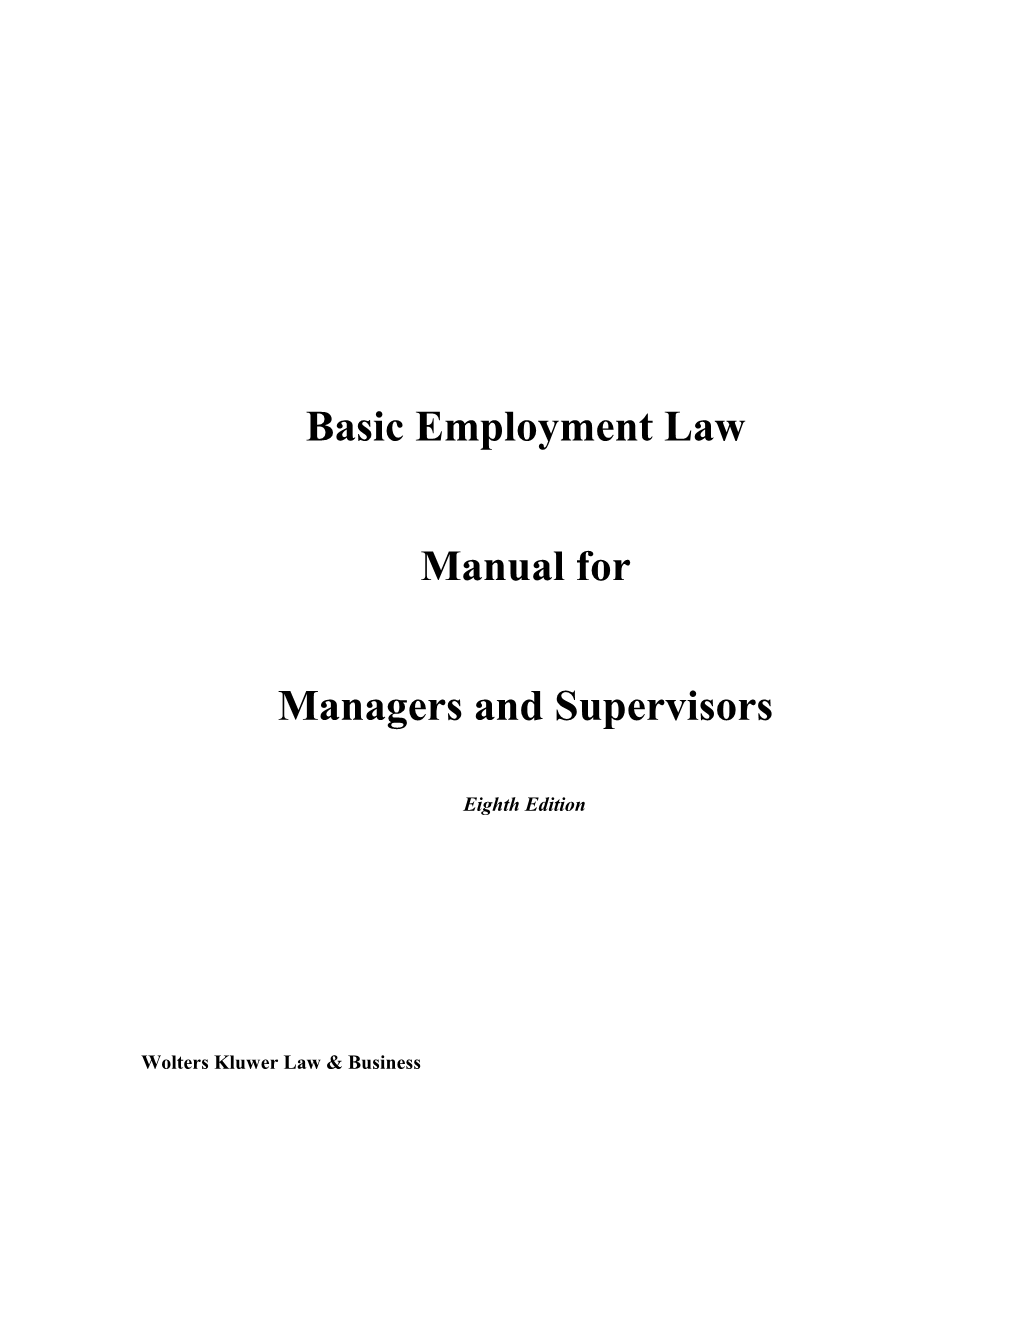 Basic Employment Law Manual for Managers and Supervisors